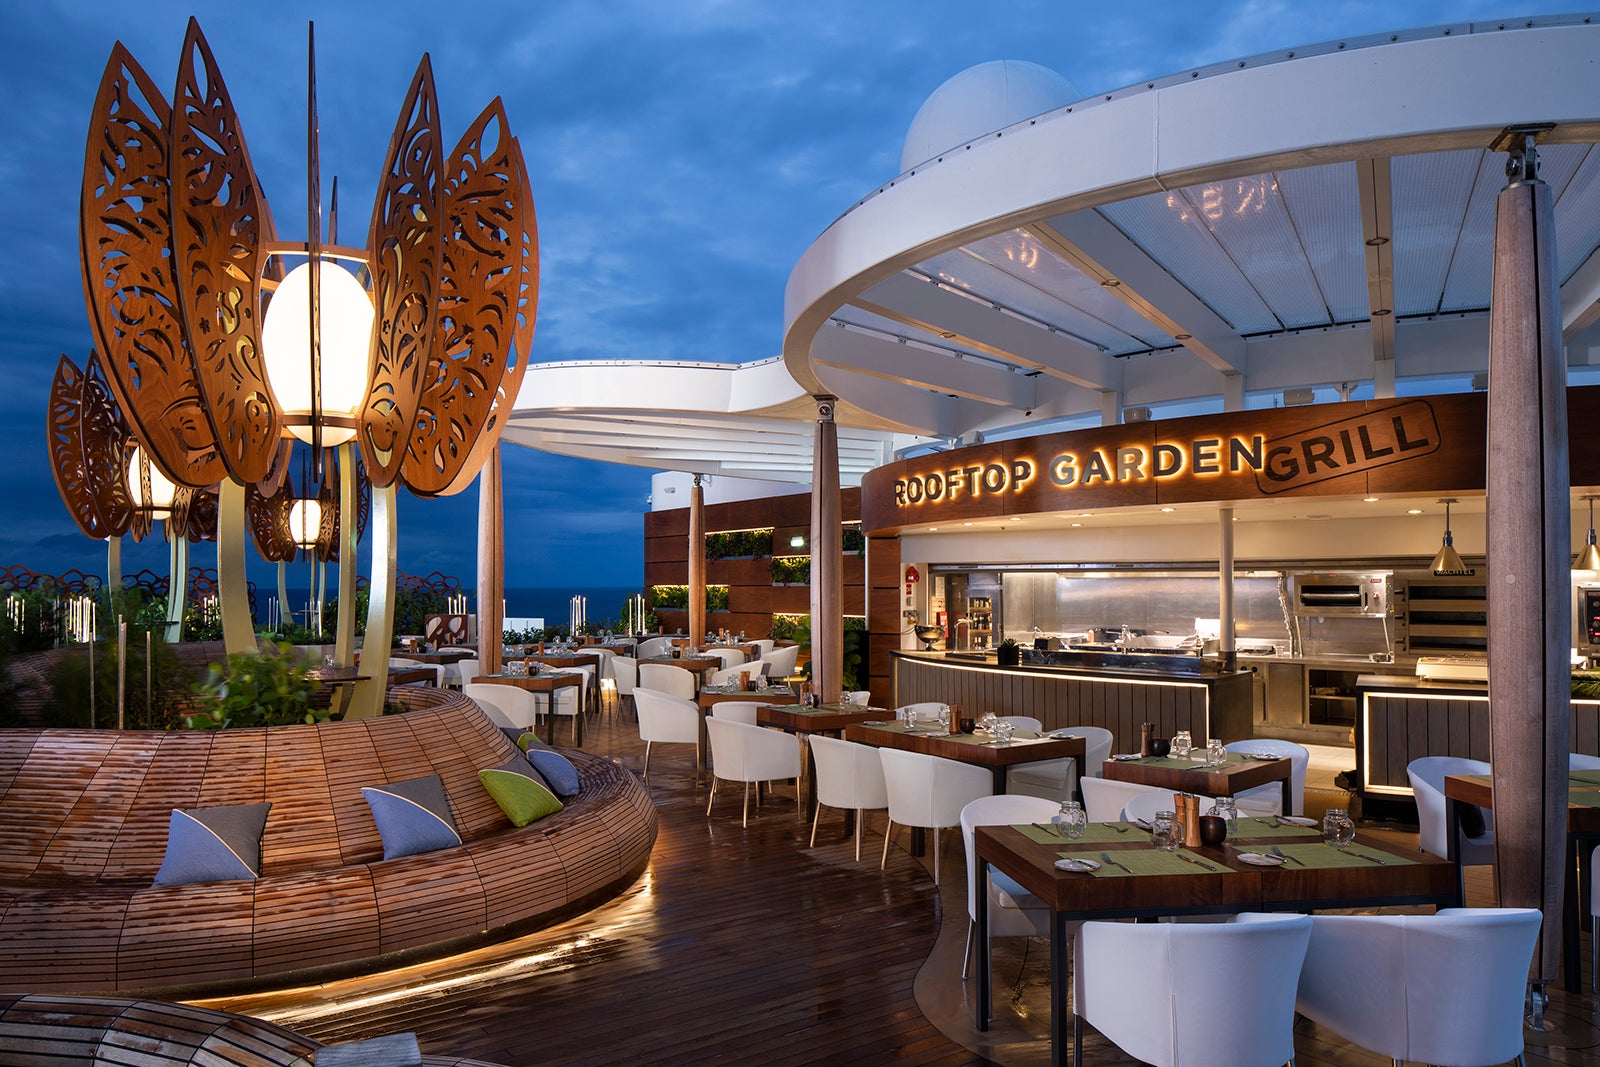 celebrity cruise solstice dining options